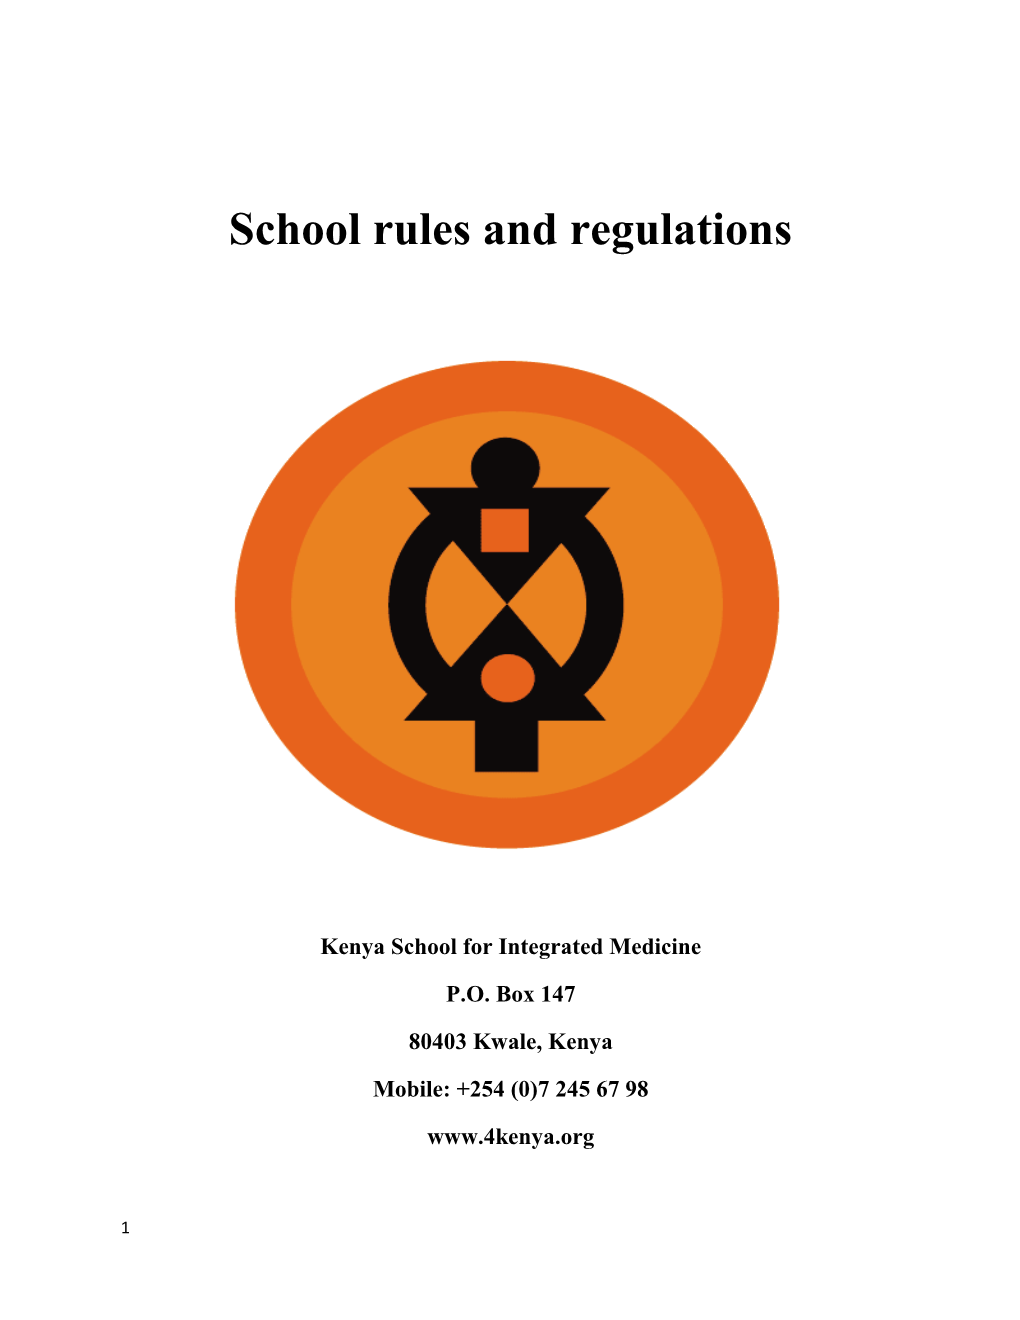 School Rules and Regulations